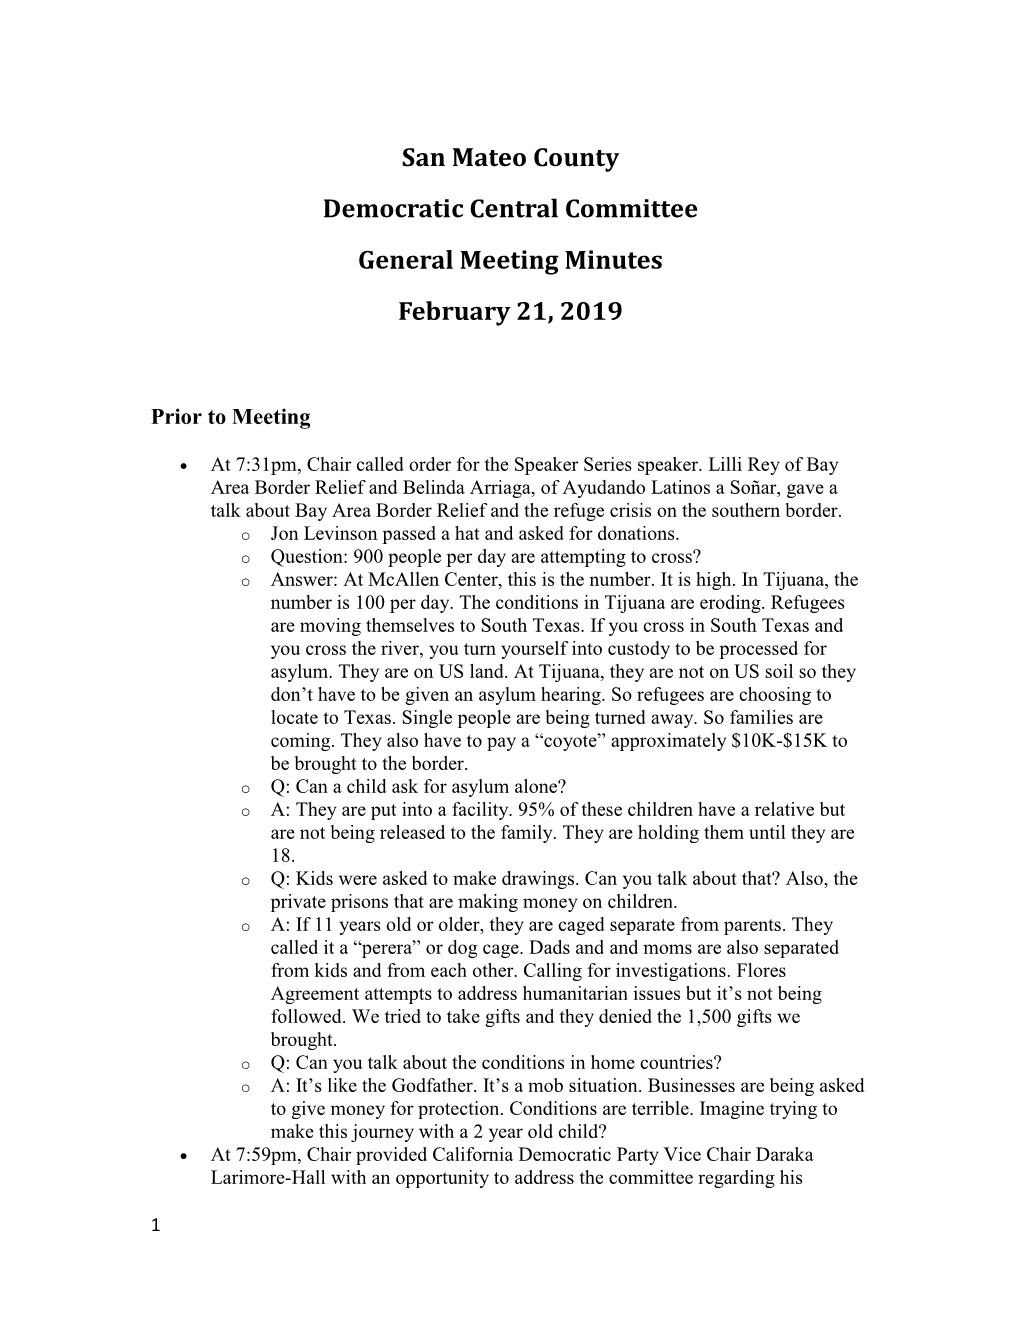 San Mateo County Democratic Central Committee General Meeting Minutes February 21, 2019